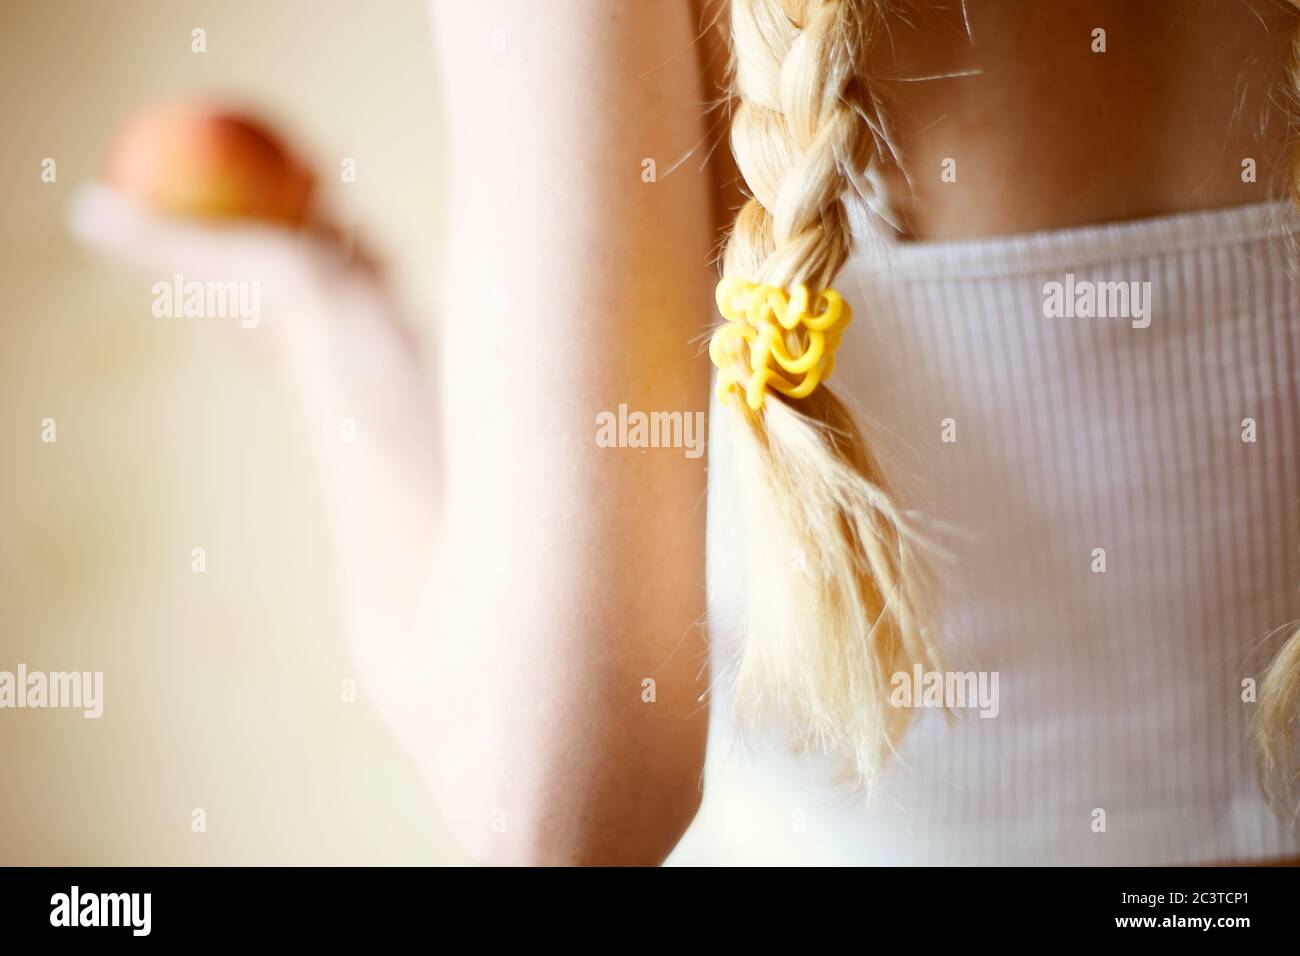 Young girl with blond pigtails in a white. Red apple in blurred hand. Stock Photo